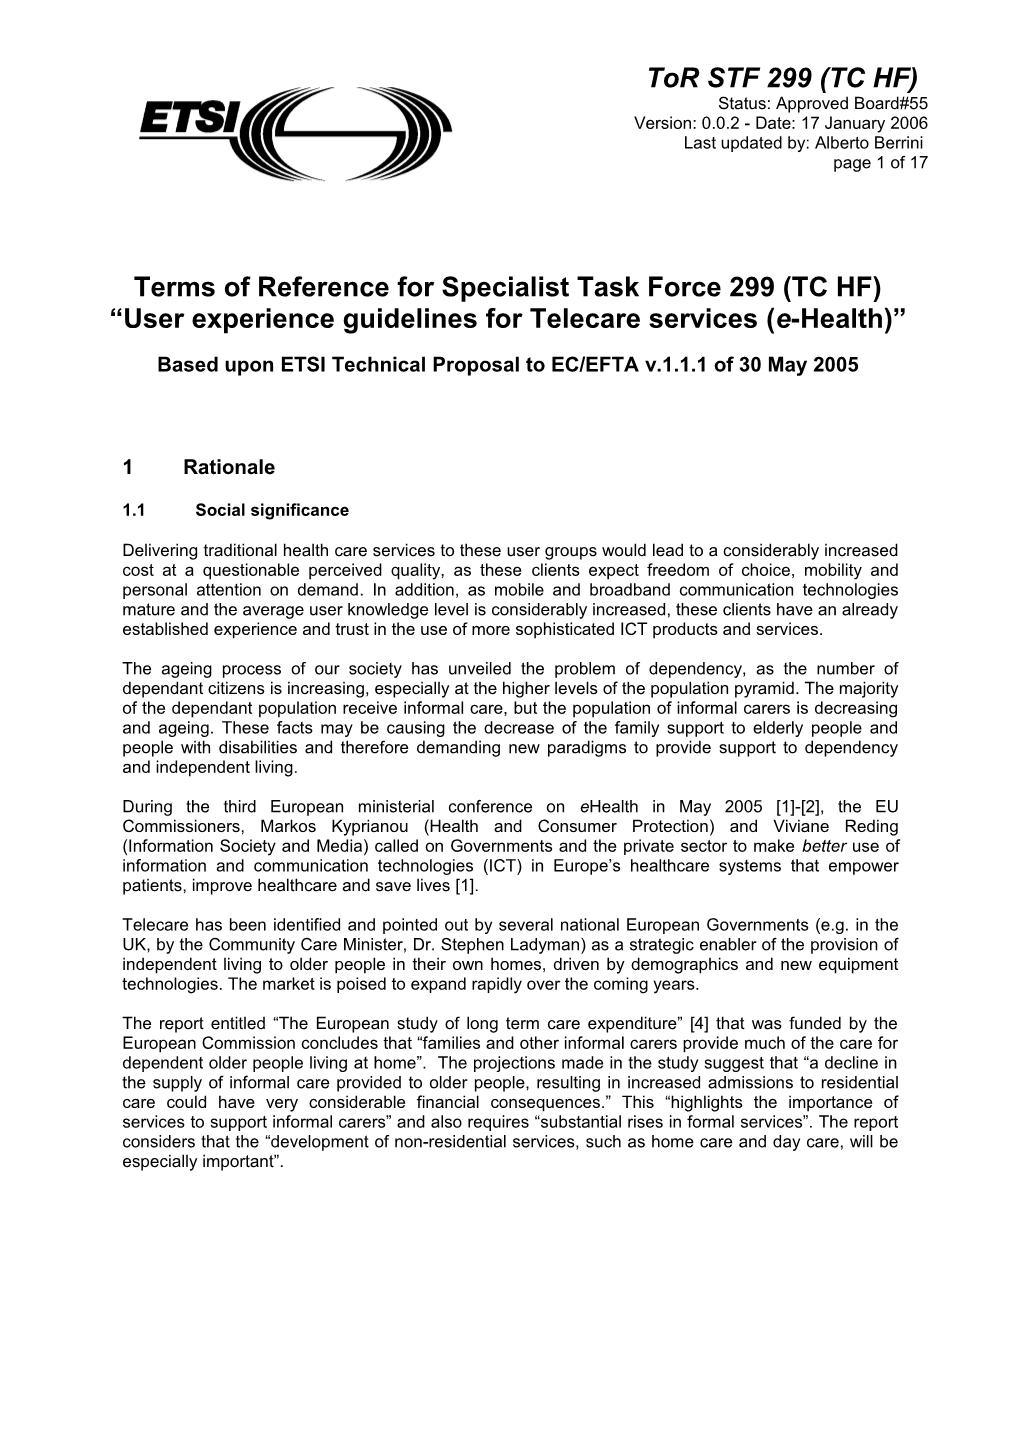 Terms of Reference for Specialist Task Force STF PU